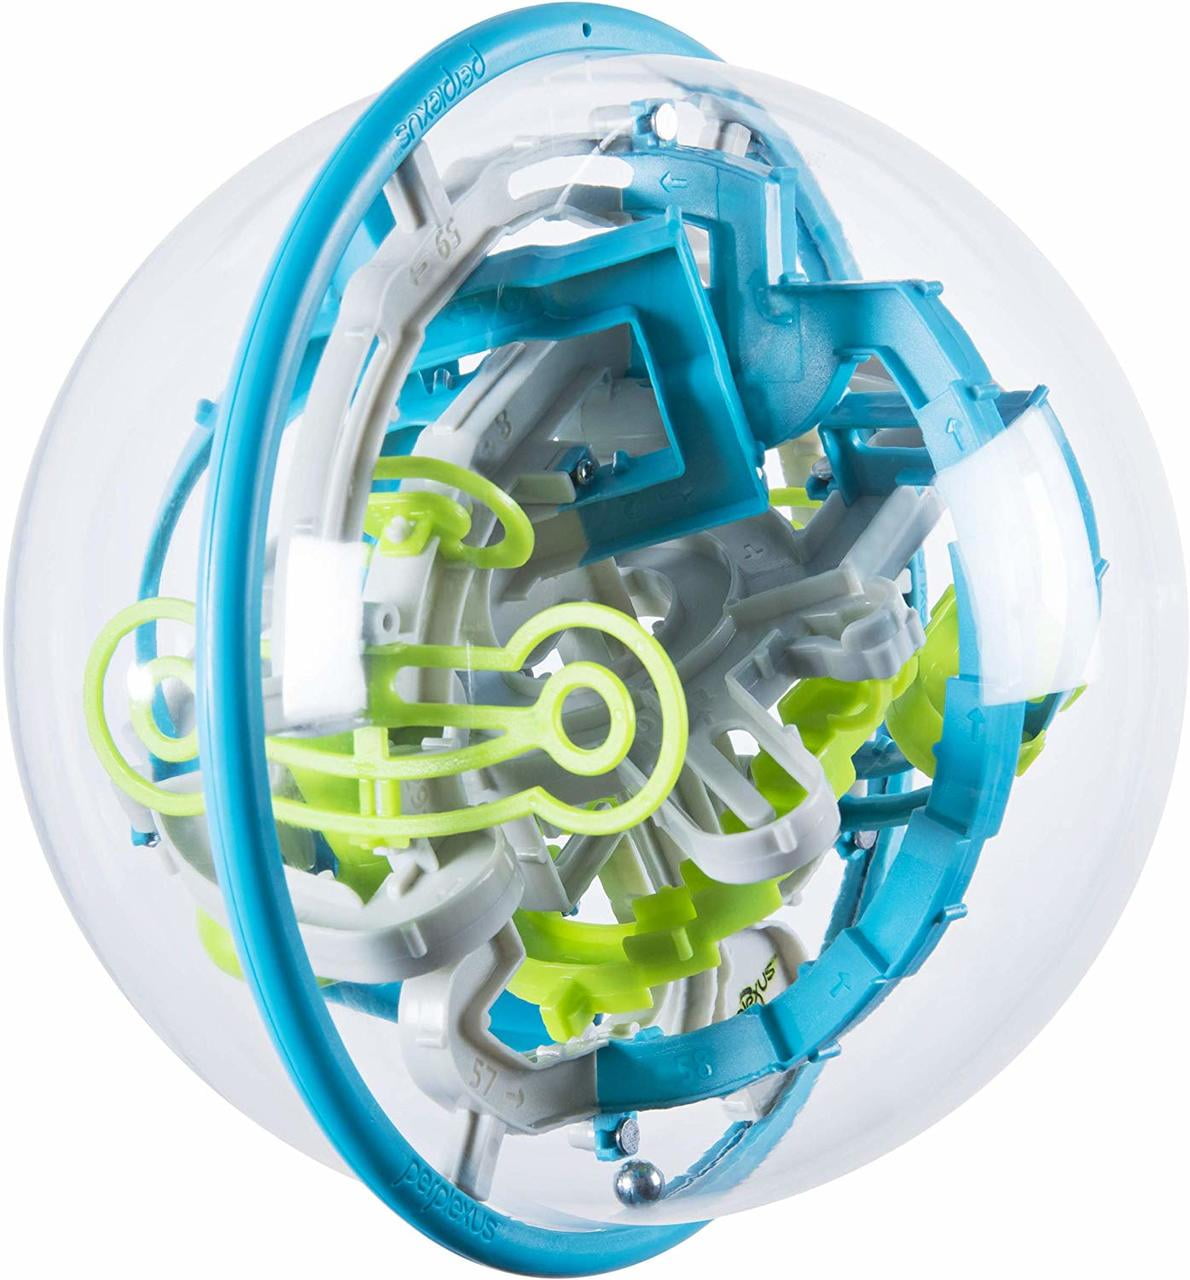 3D Maze Game with 70 Obstacles Edition May Vary Perplexus Rebel 